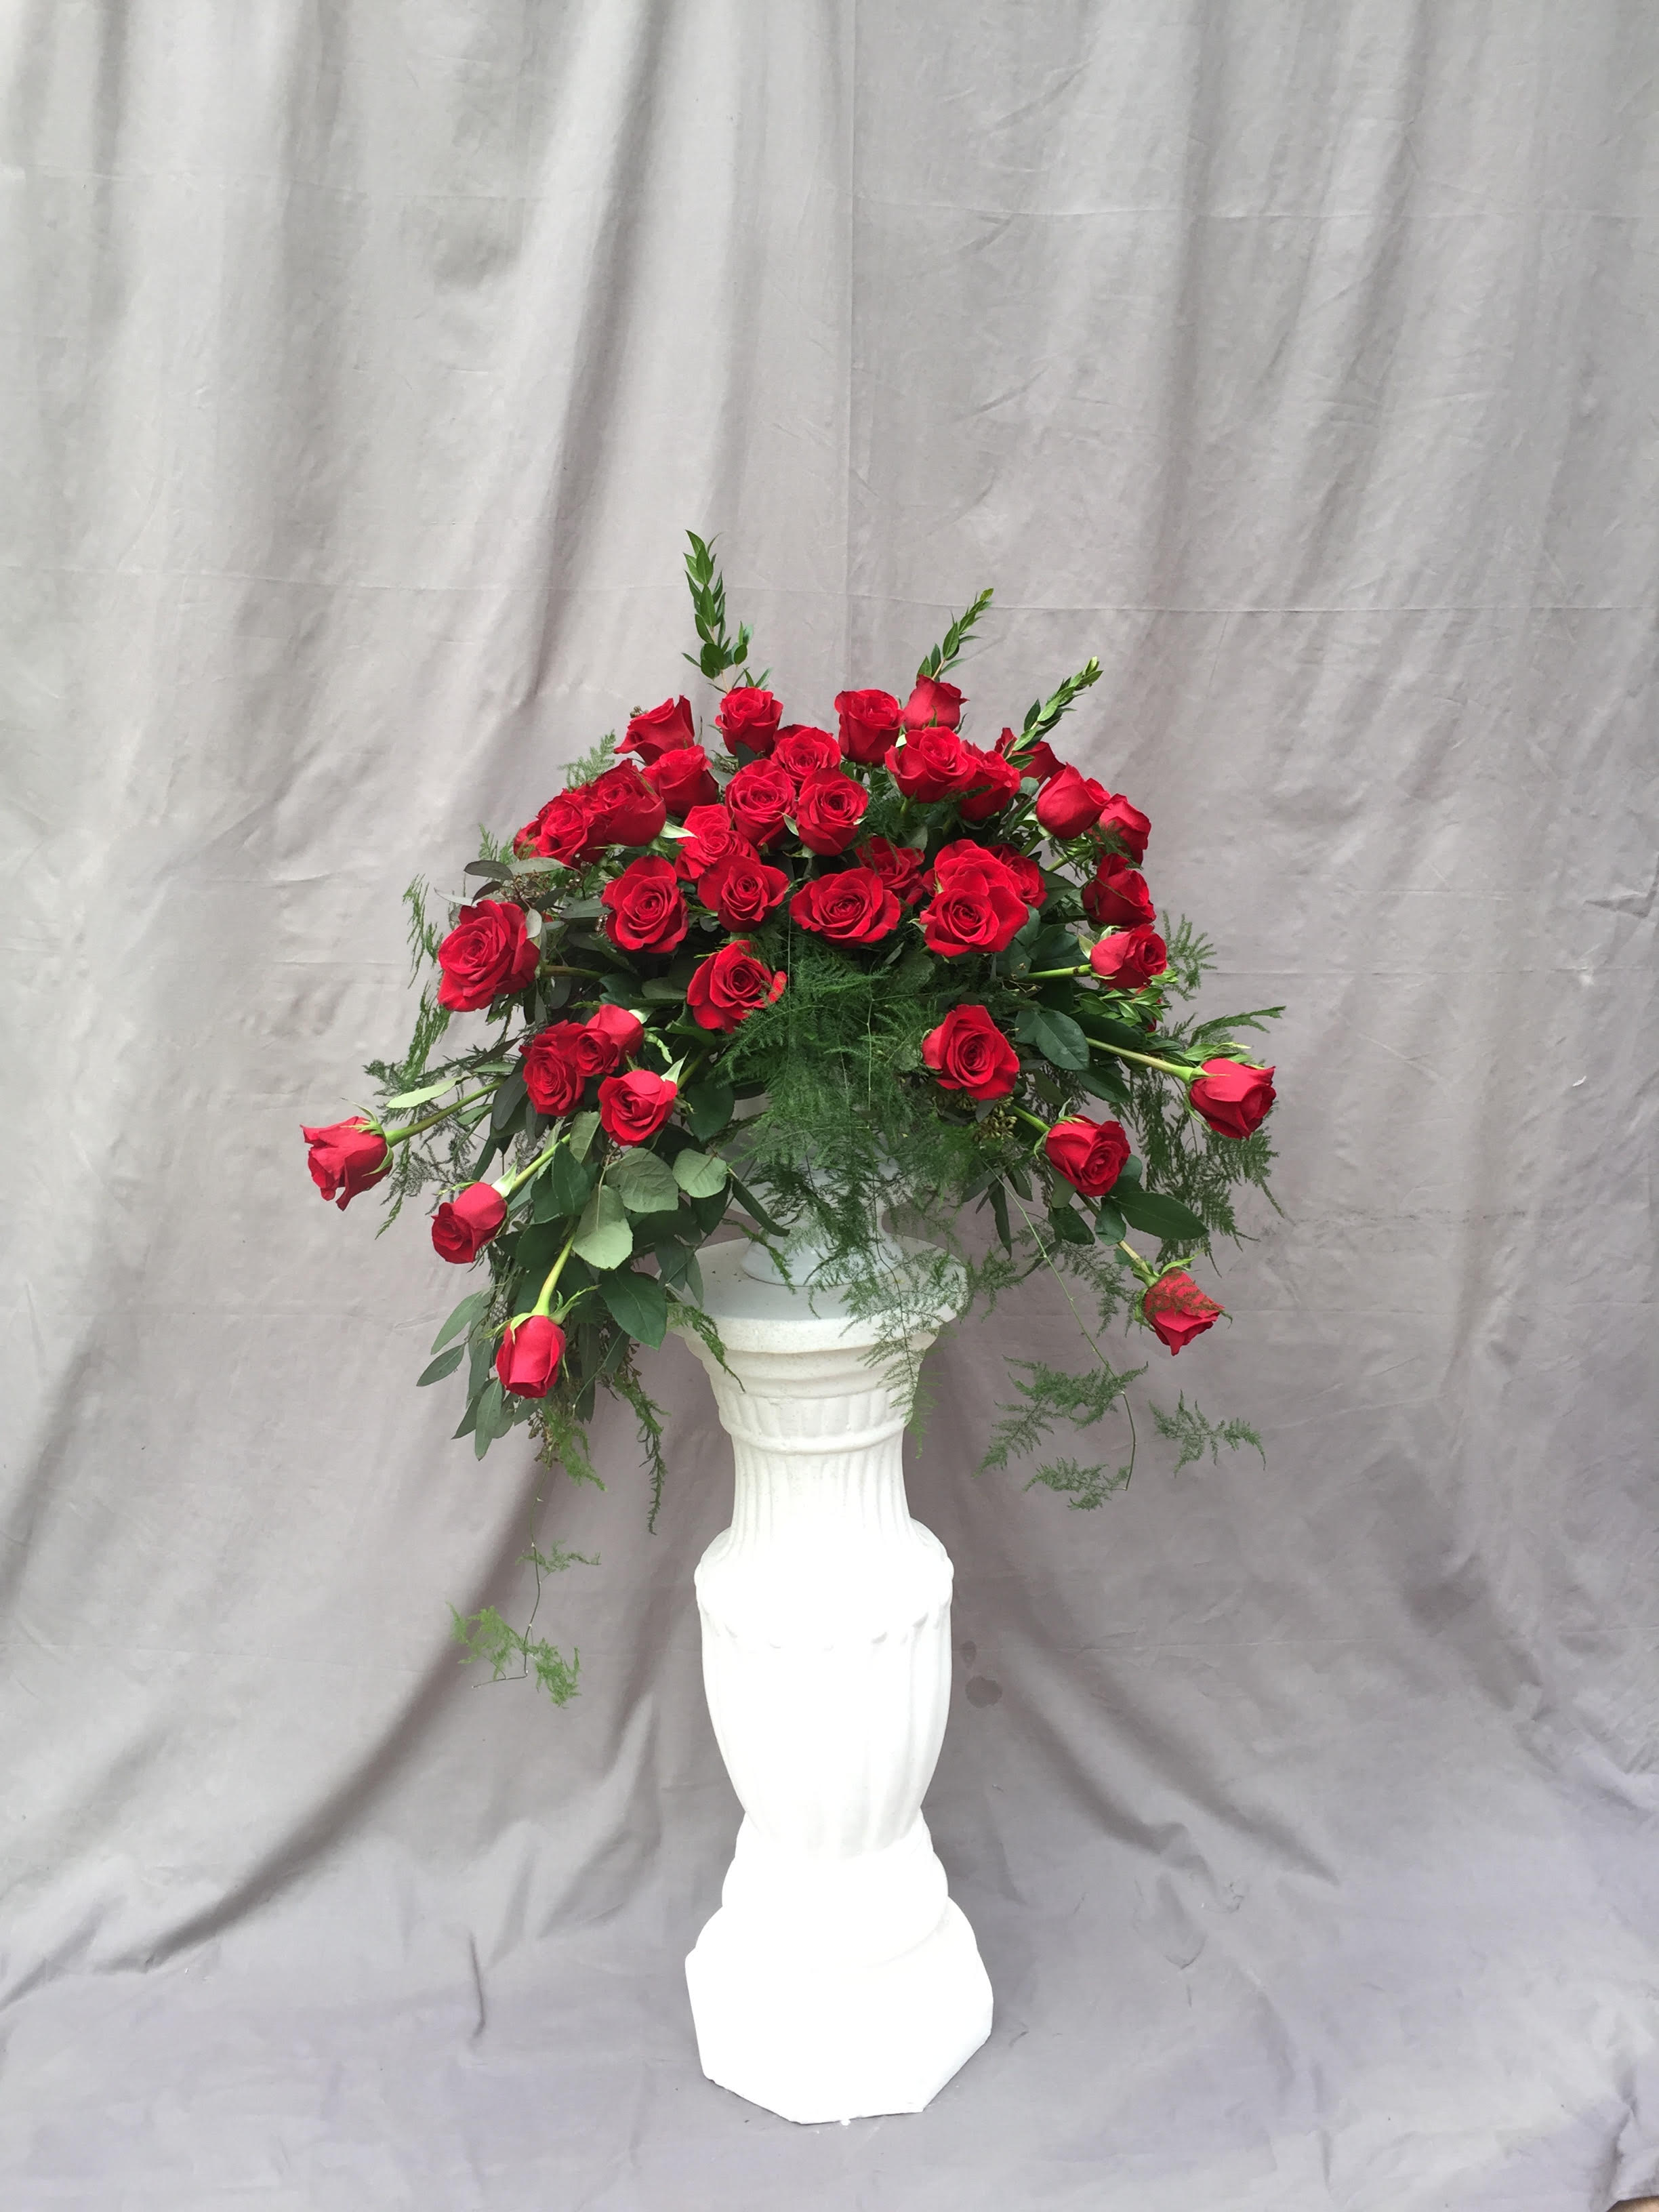 Red Rose Sympathy Urn - Our beautiful red freedom roses with lush greenery make a lovely tribute to your loved one.